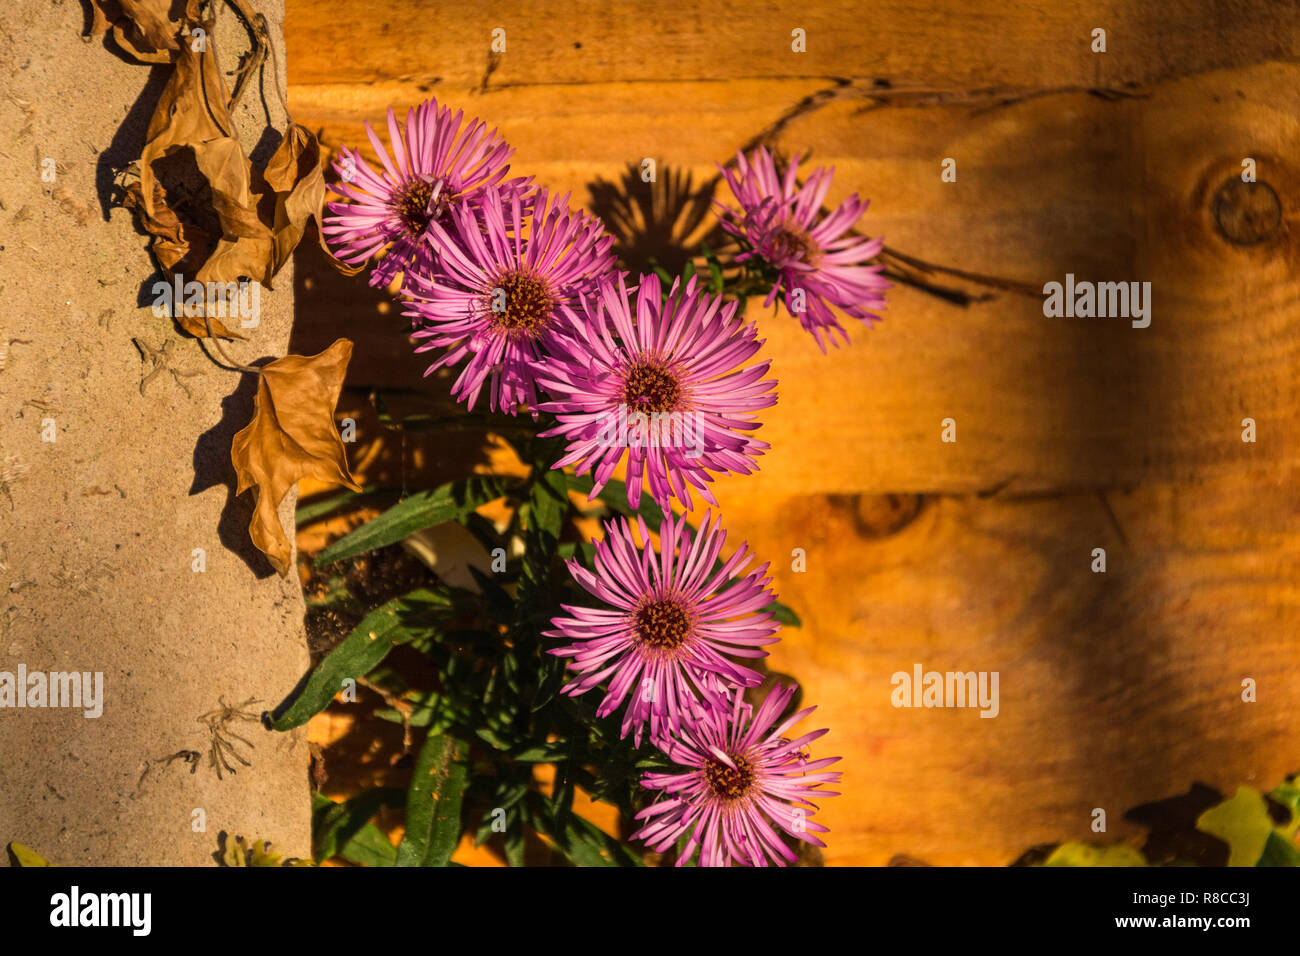 A group of pink Michaelmas Daisies (Aster Amellus) growing beside a wooden fence and fence post. Stock Photo